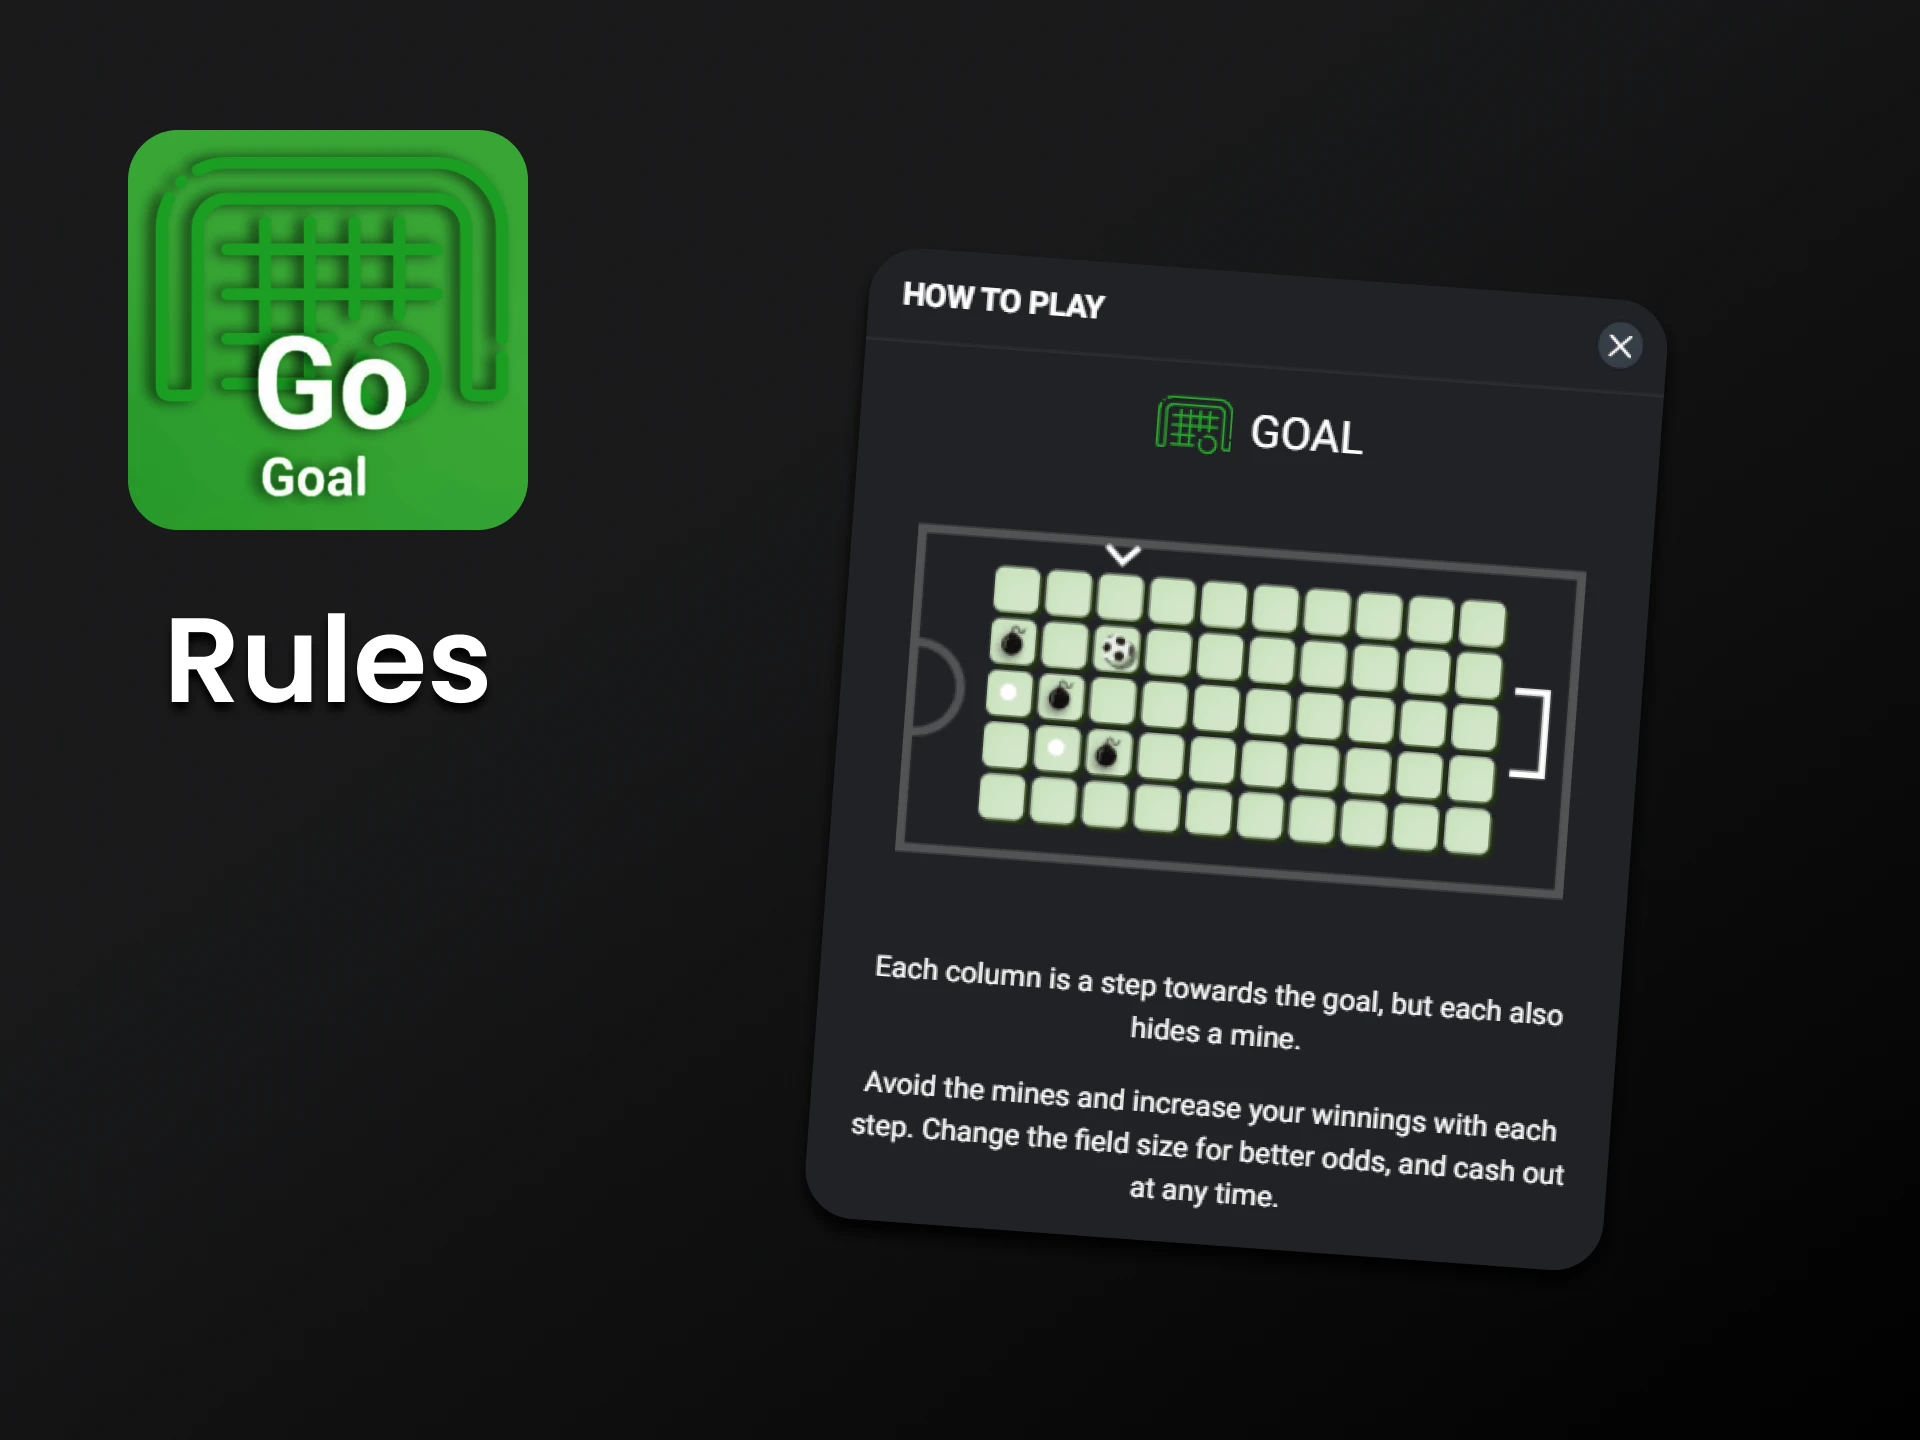 We will tell you the rules of the game Goal.